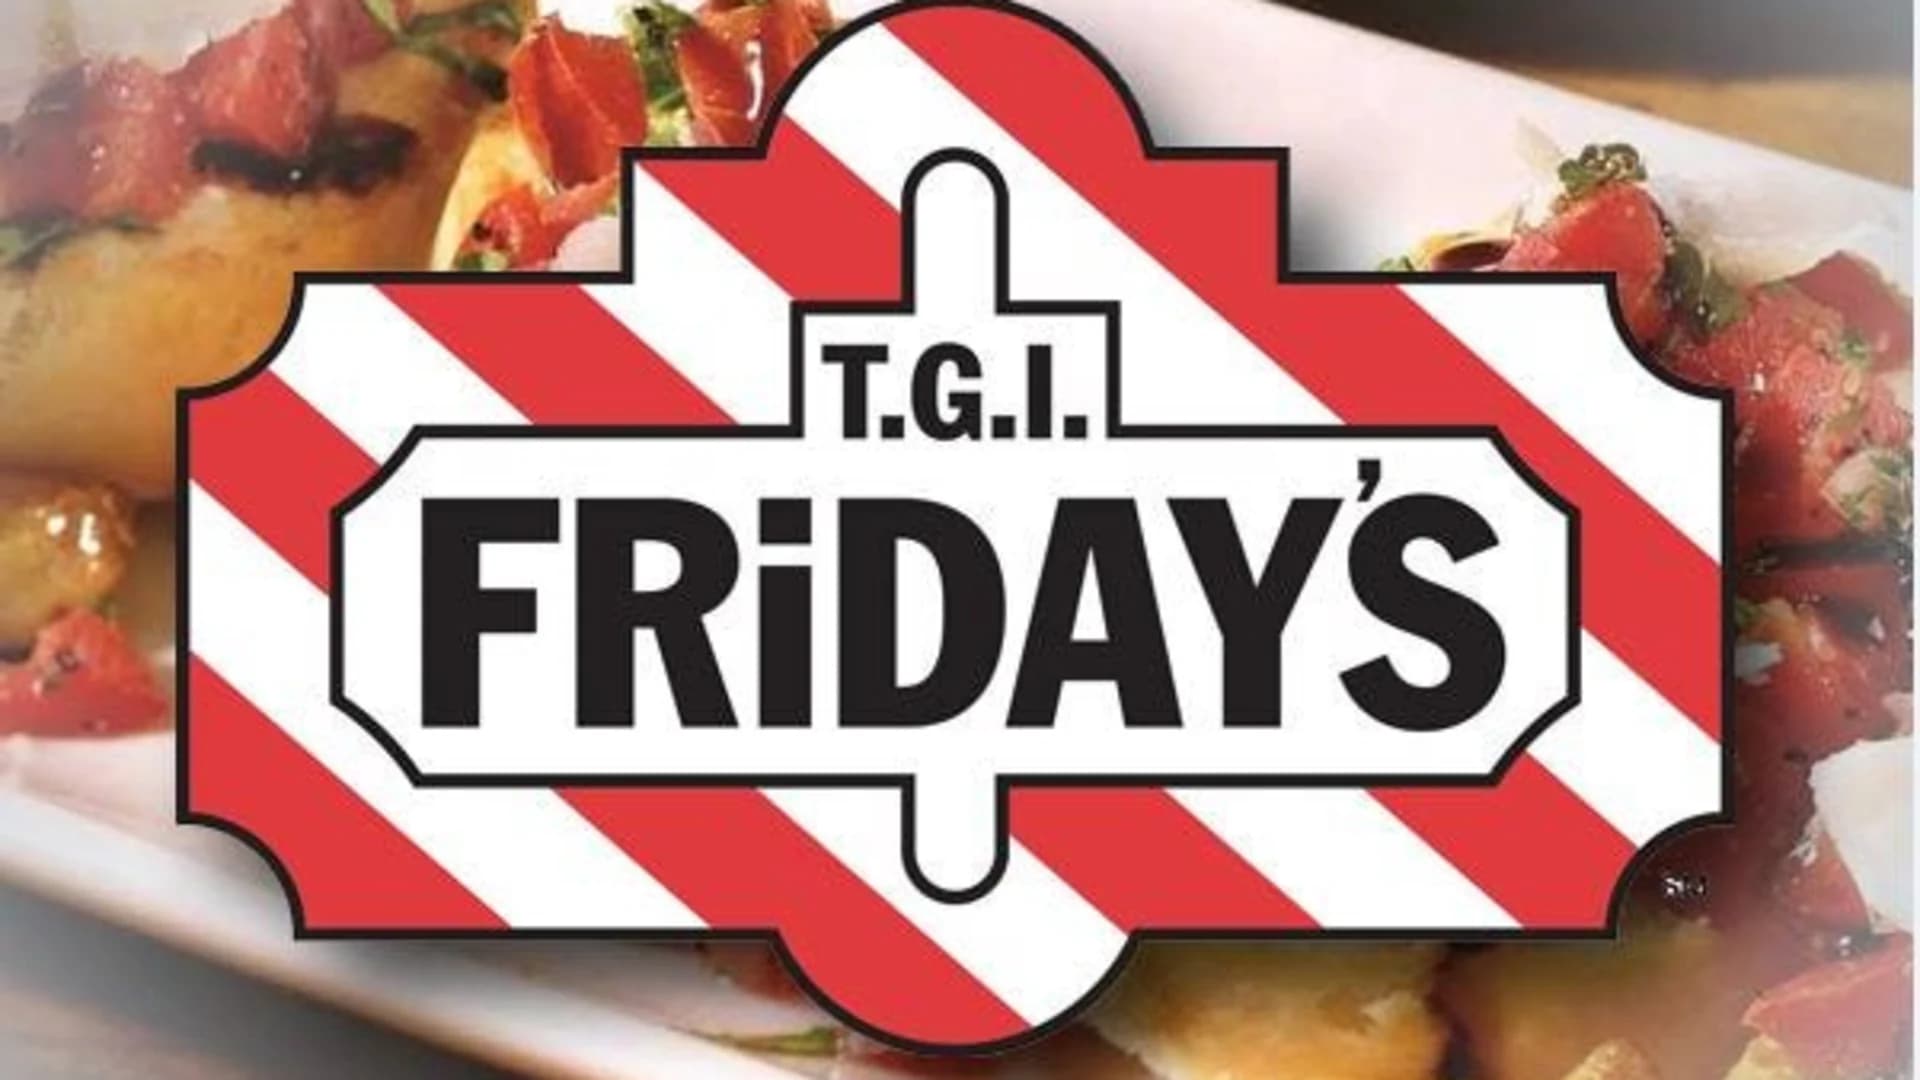 Court: TGI Friday's drink prices lawsuit can be class action